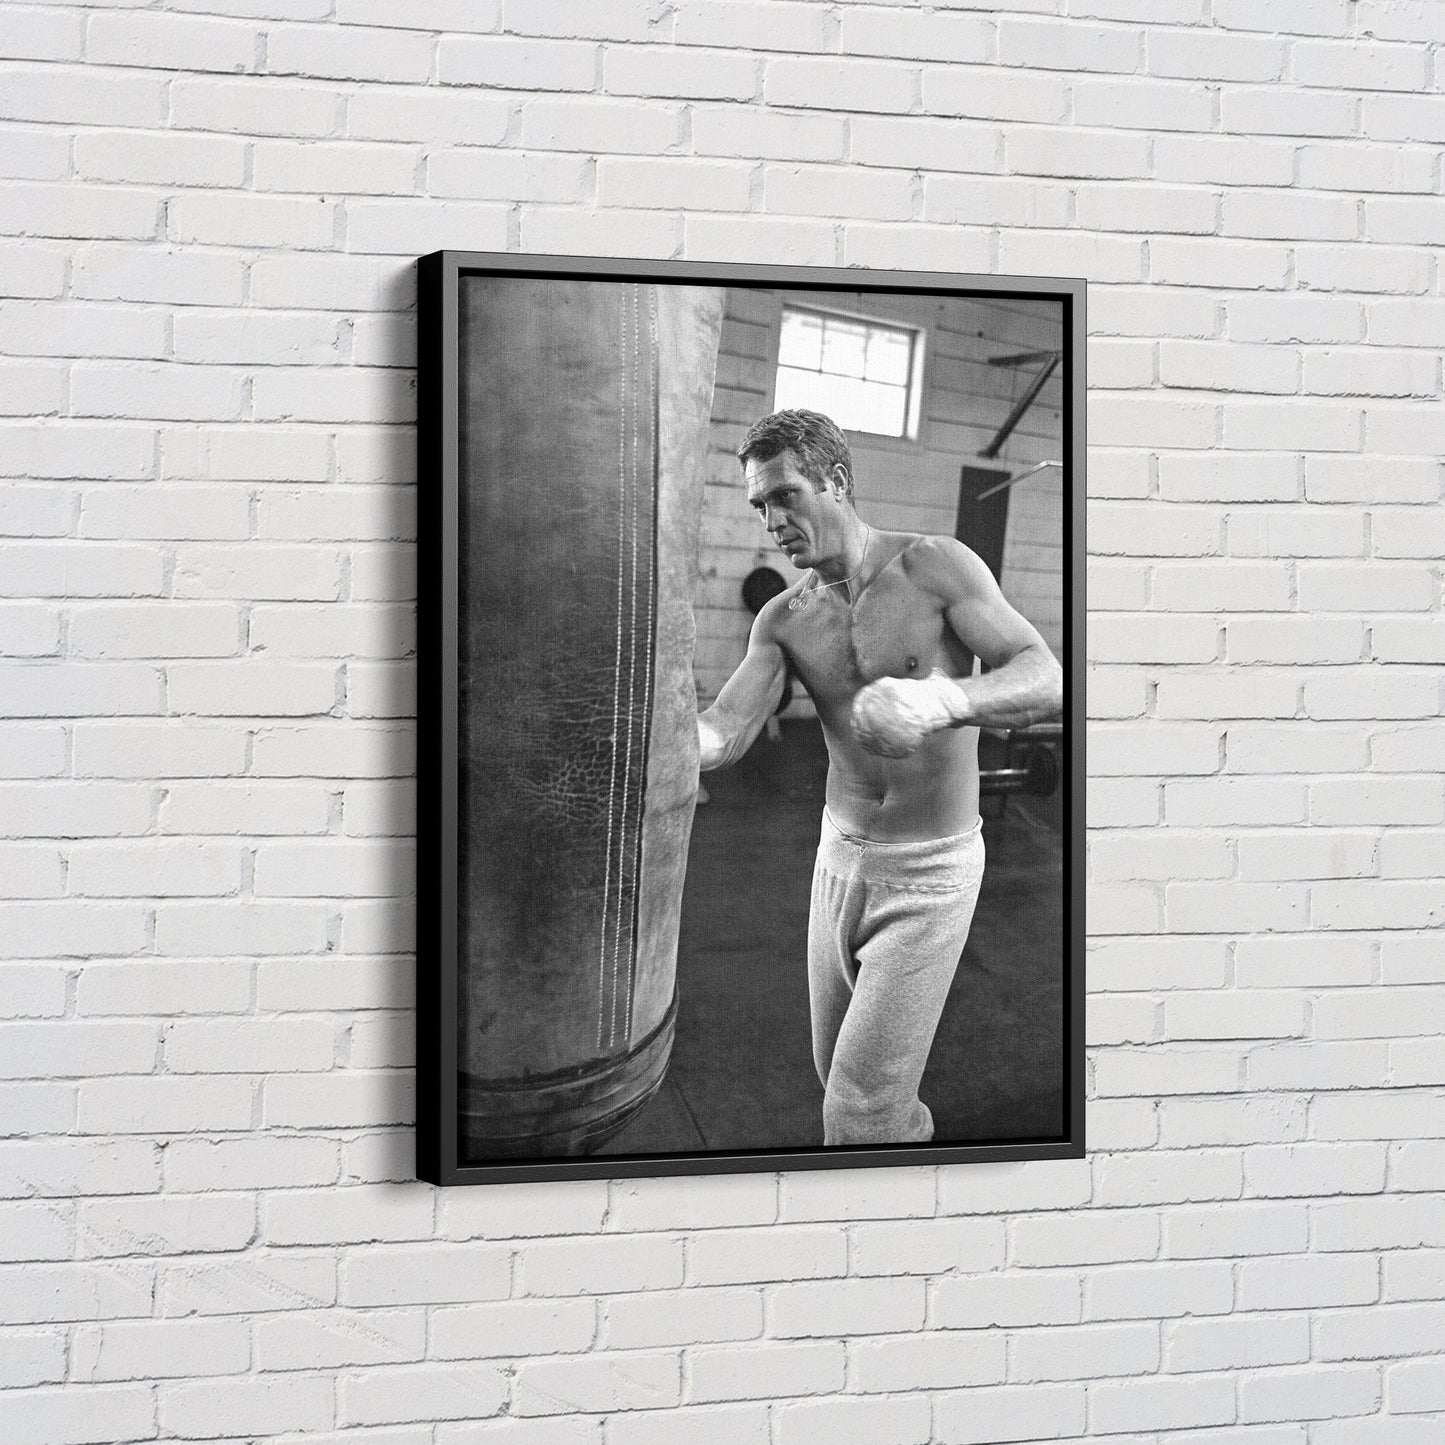 Steve McQueen Poster Training Boxing Black and White Wall Art Home Decor Hand Made Canvas Print